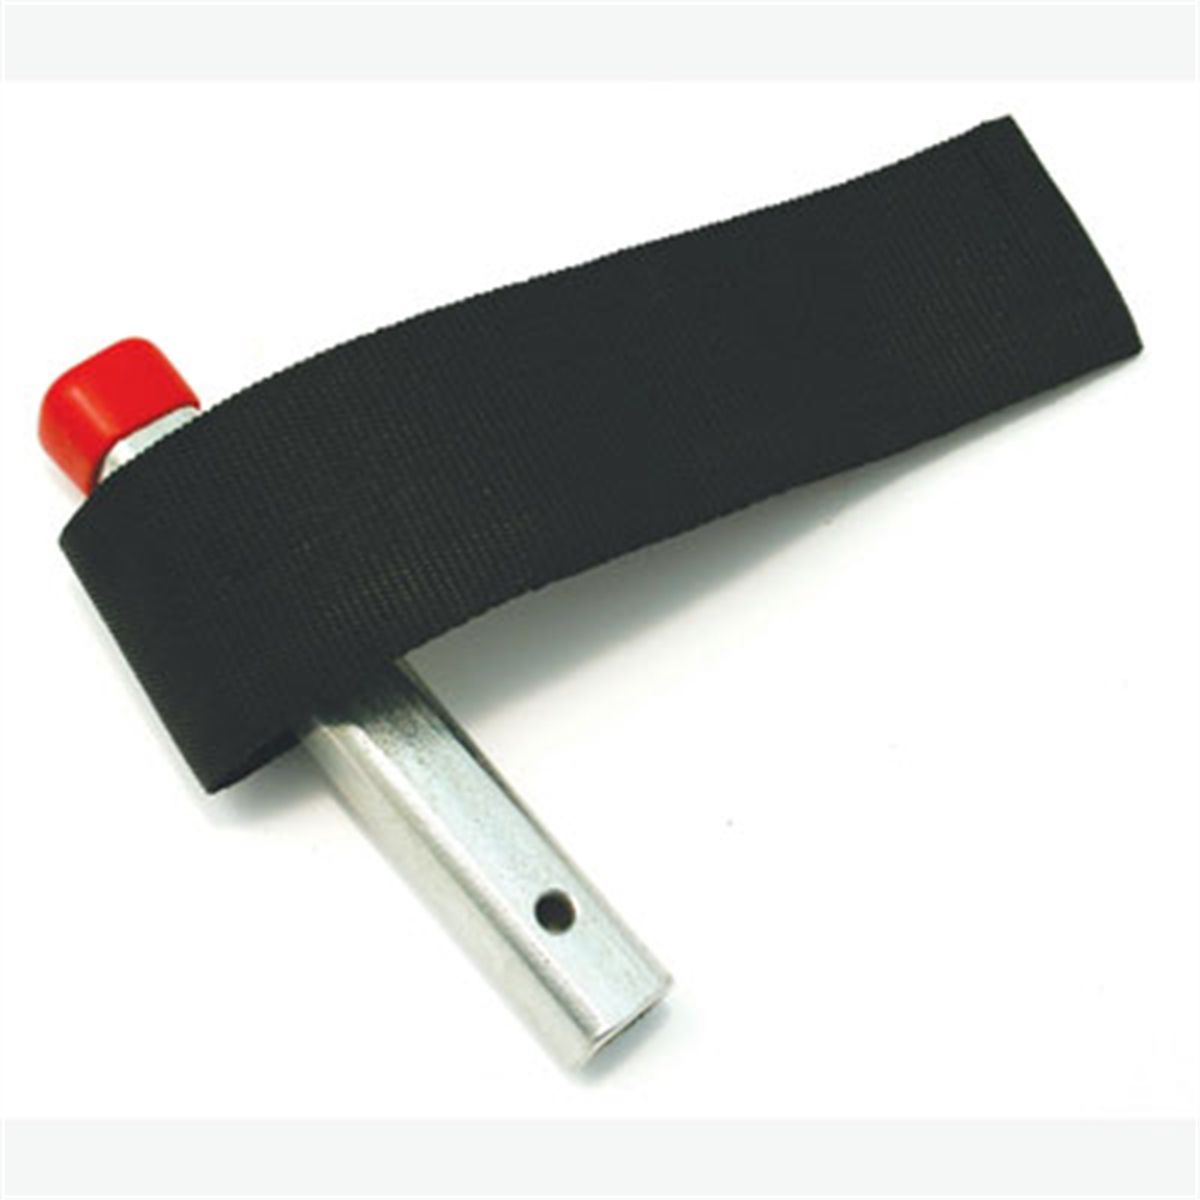 Strap-Type Oil Filter Wrench